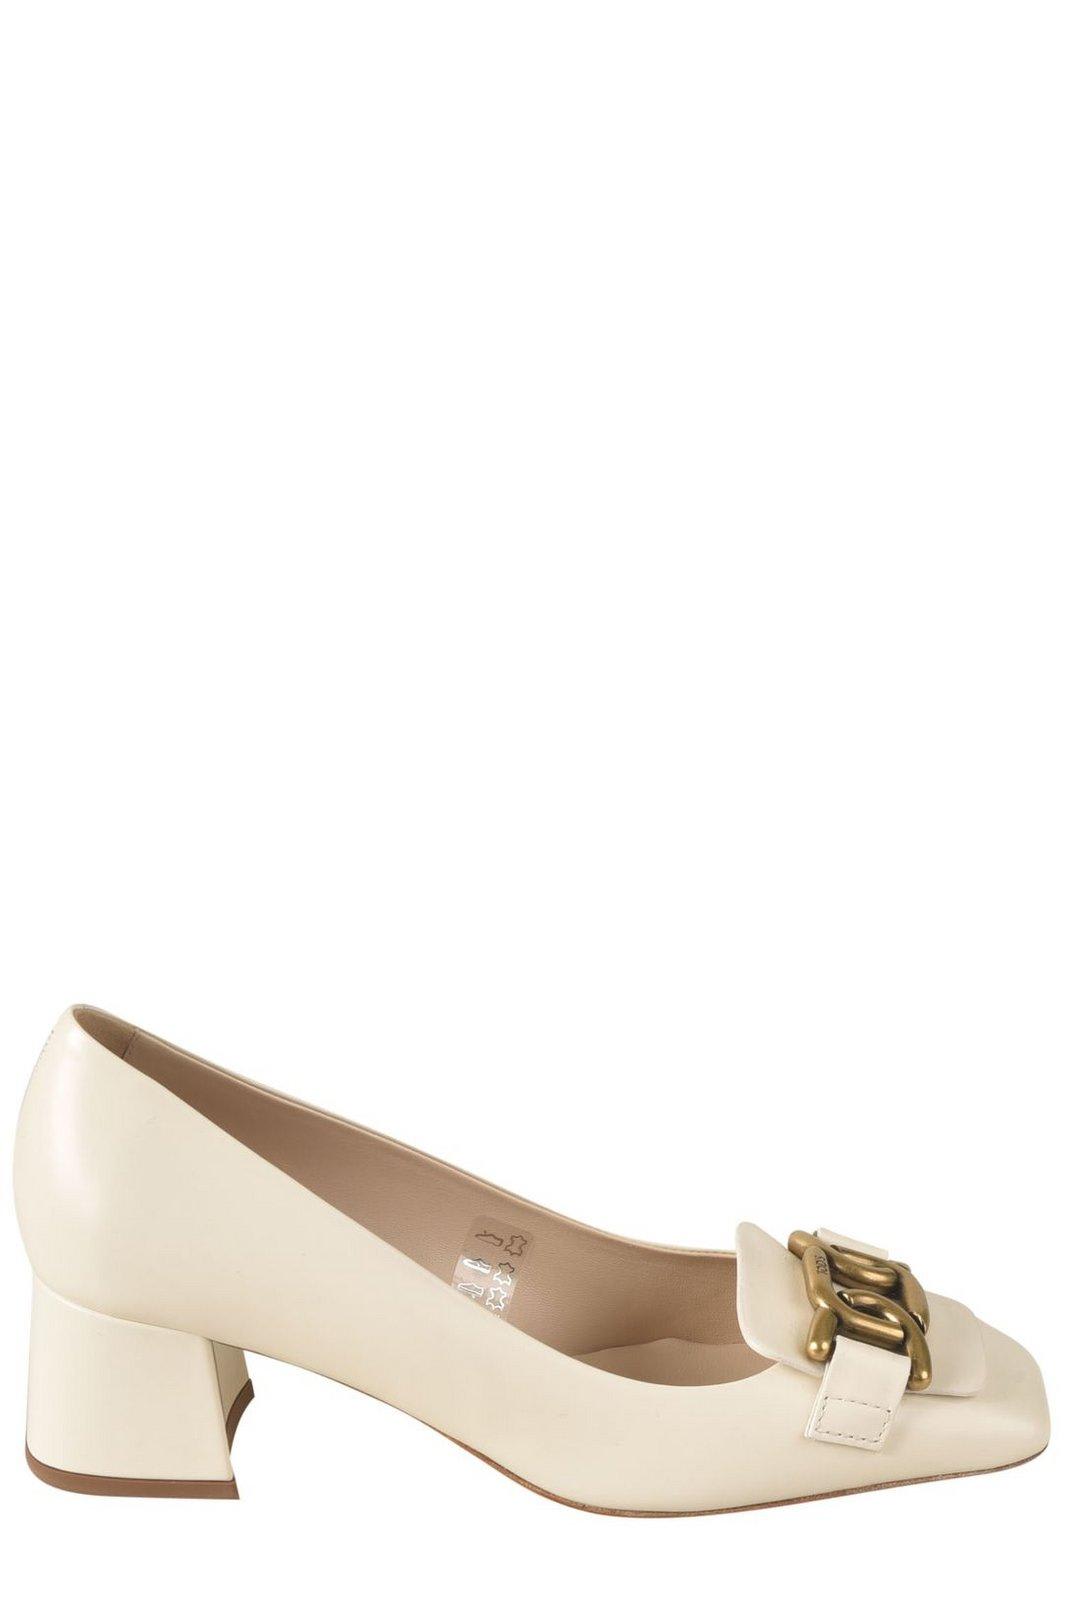 Shop Tod's Kate Pumps In Neutrals